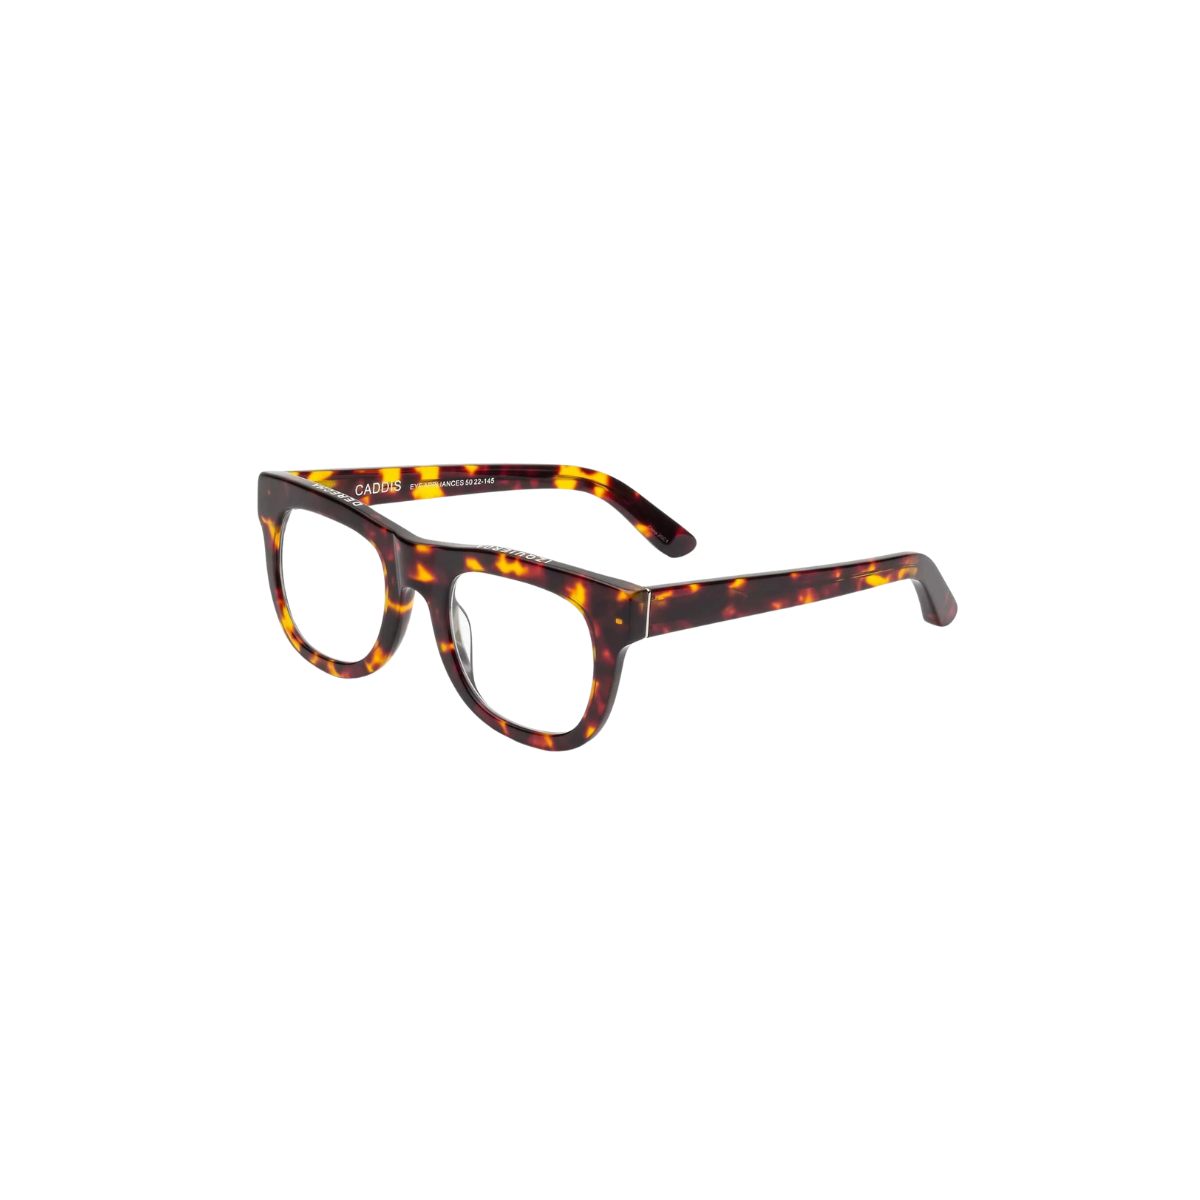 Caddis D28 Reading Glasses in Turtle